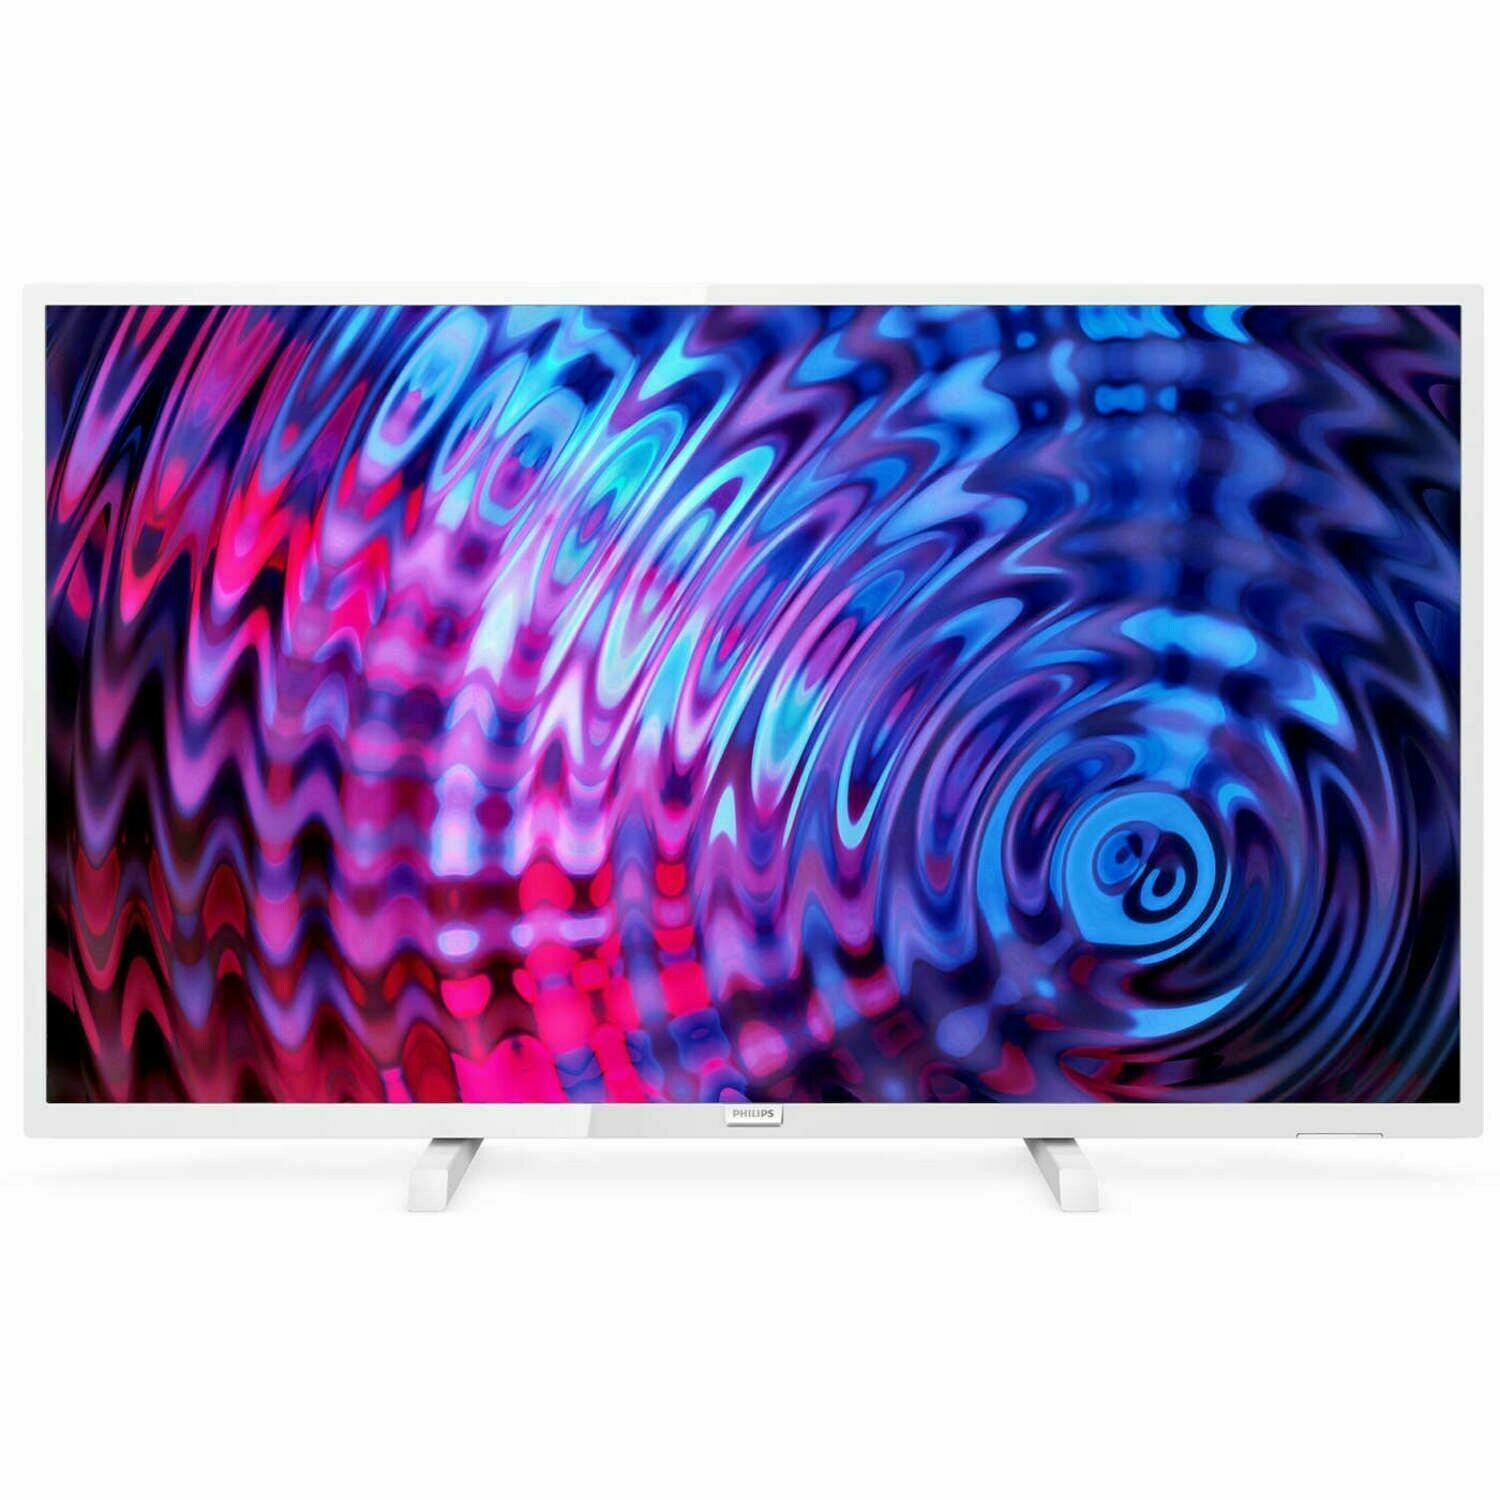 Refurbished Philips 32 Inch 32PFT5603 Full HD LED (1920 x 1080) TV Television